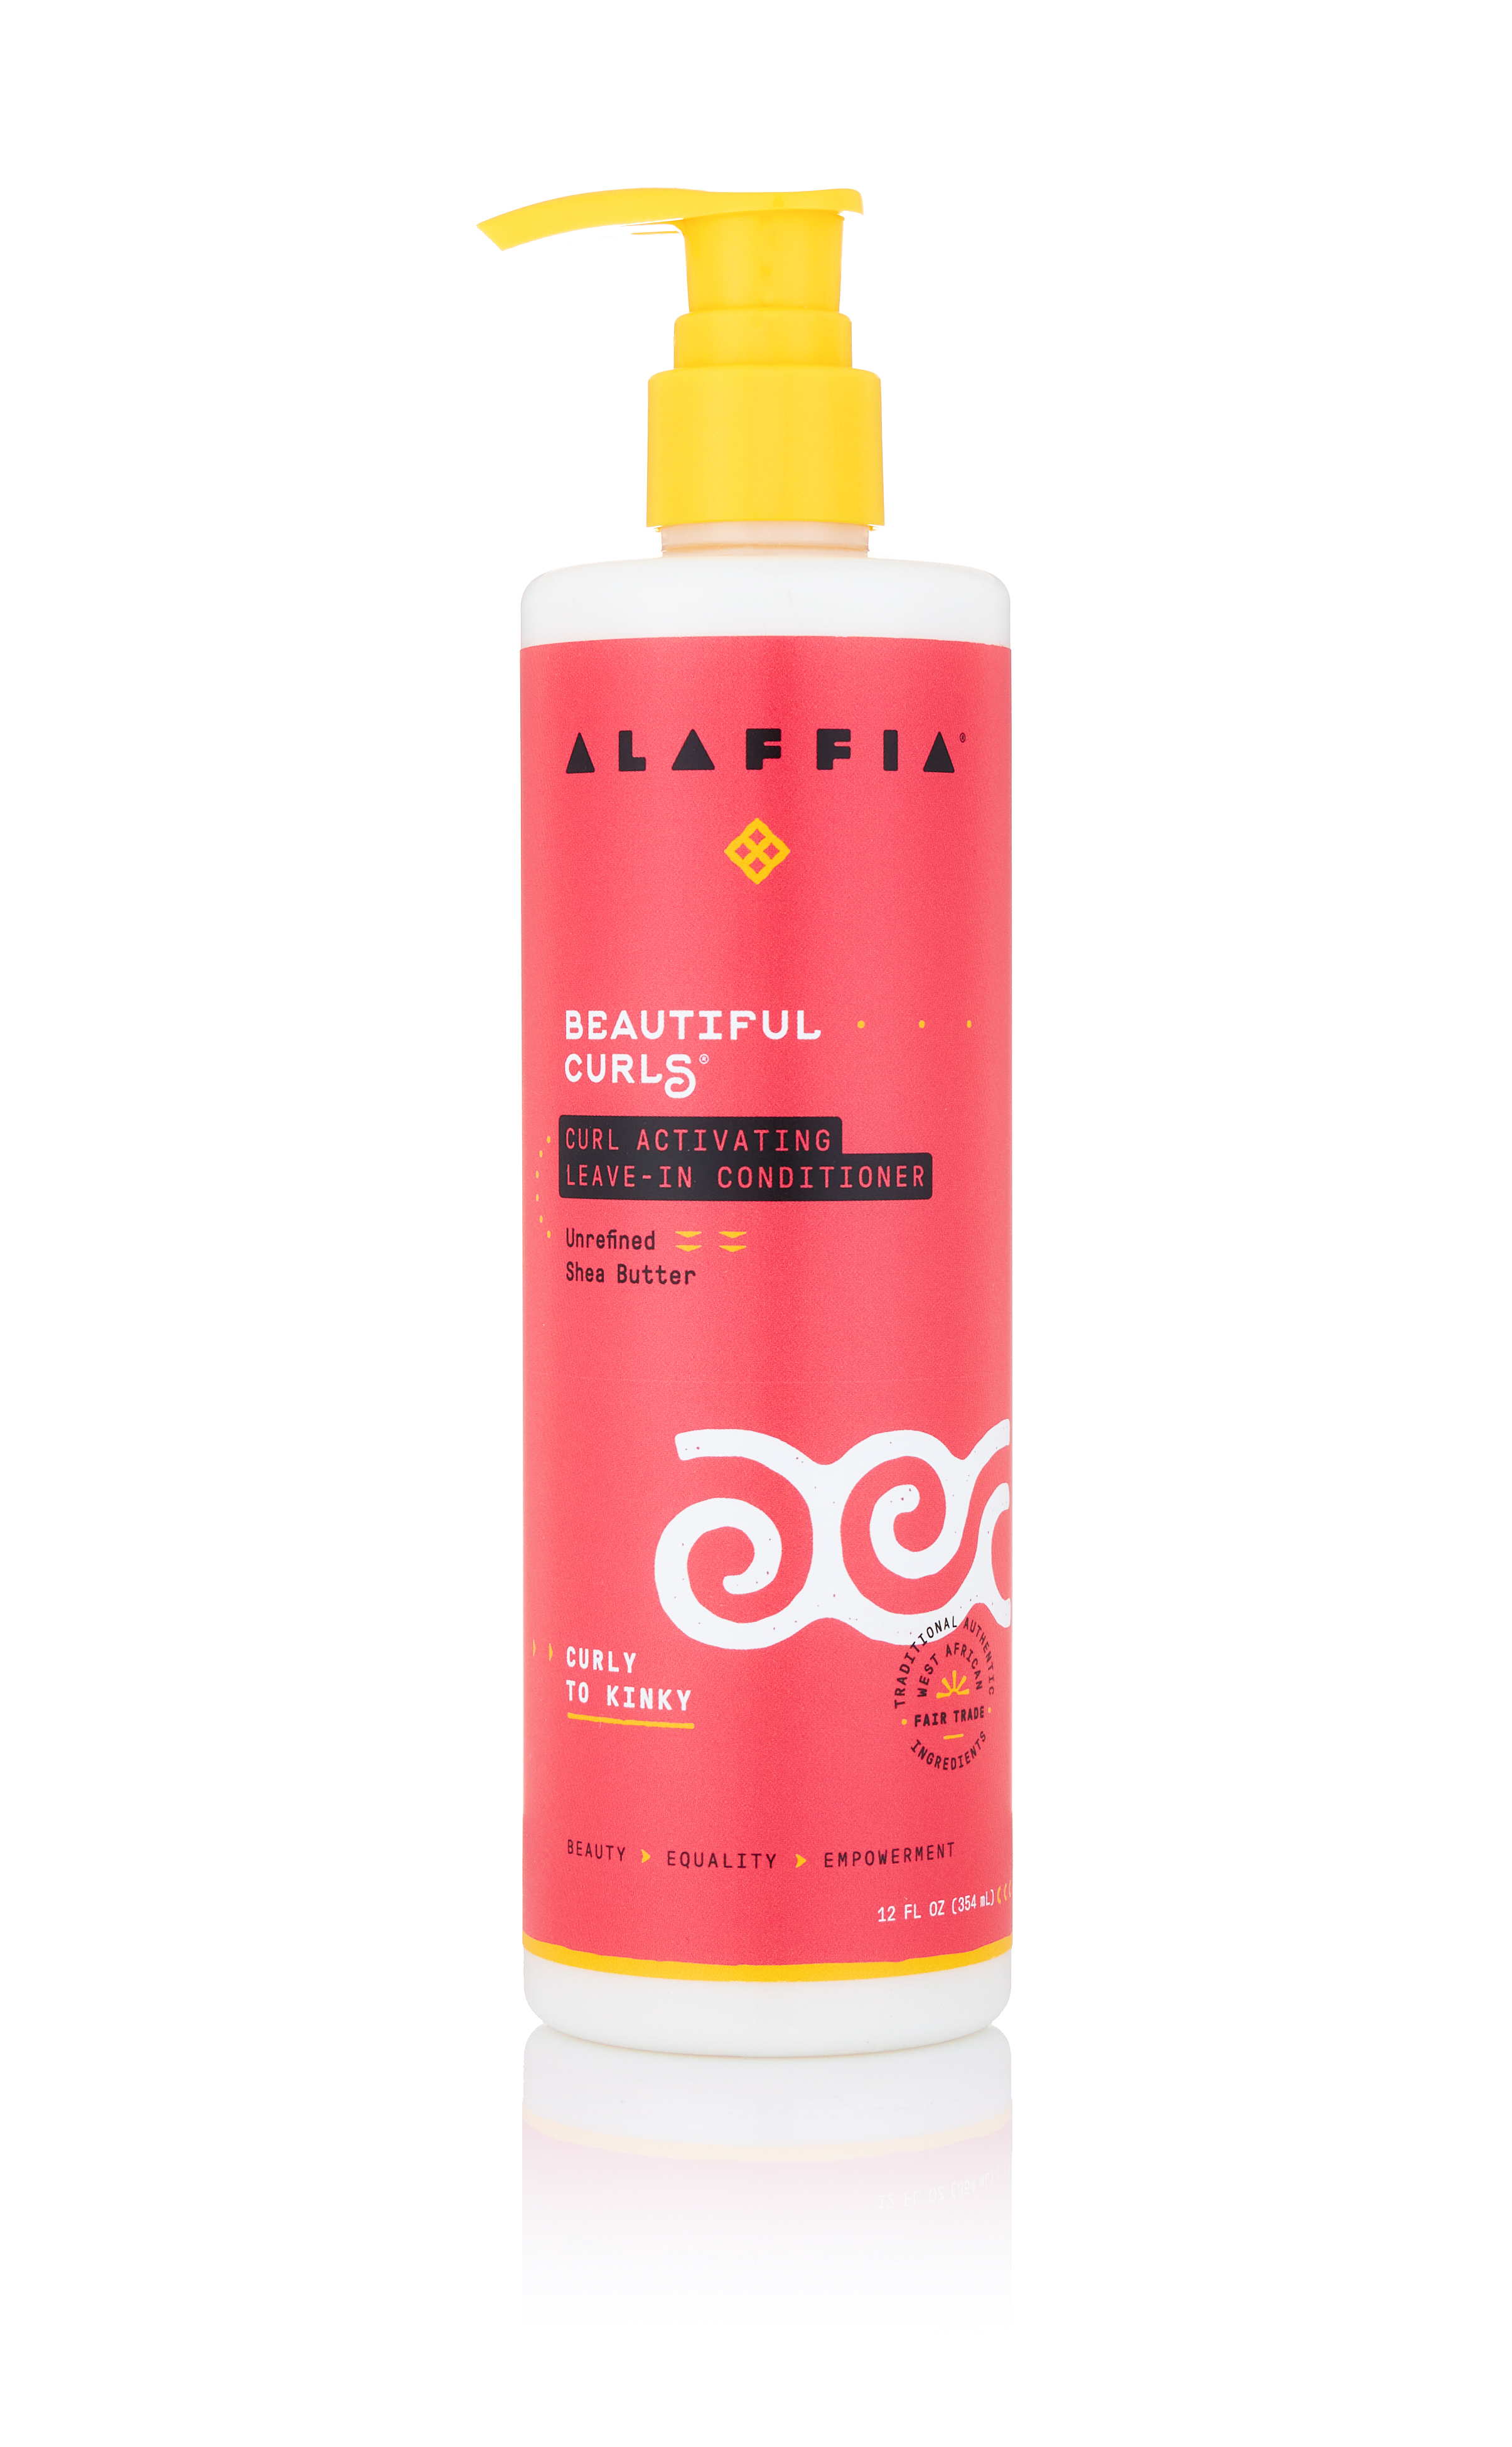 Alaffia Beautiful Curls Curl Define Leave-in Conditioner with Shea Butter, 12 fl oz - image 1 of 8